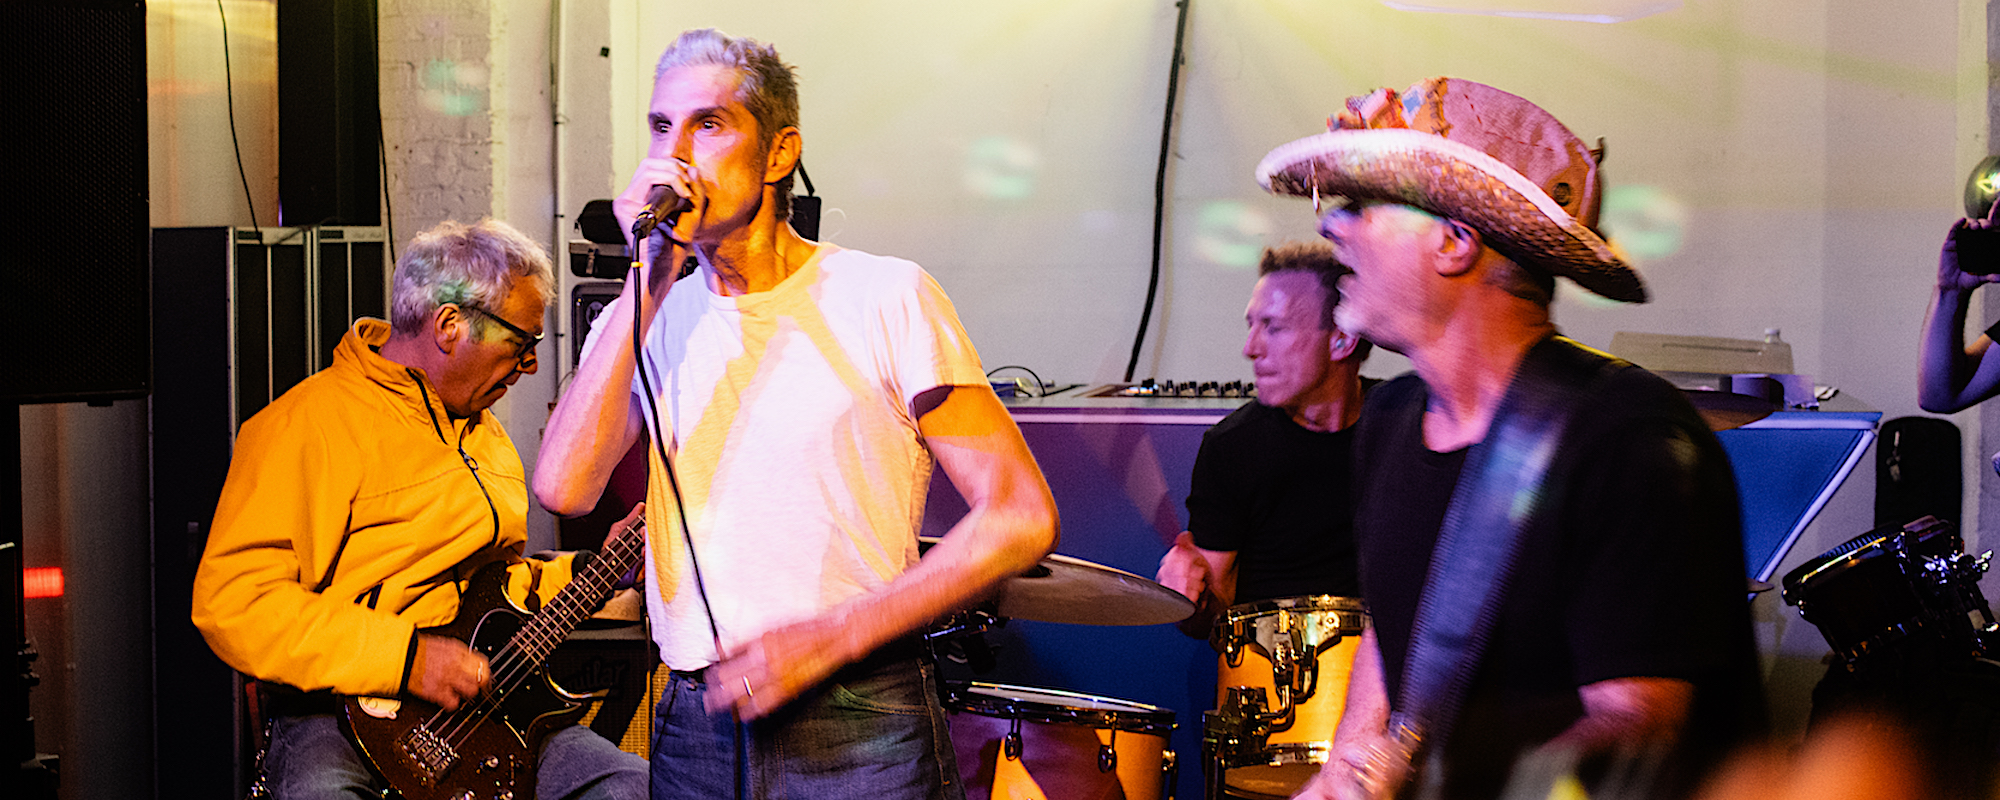 P*rno for Pyros Reunite with Bassist Mike Watt at Secret Los Angeles Loft Party (See Gallery)